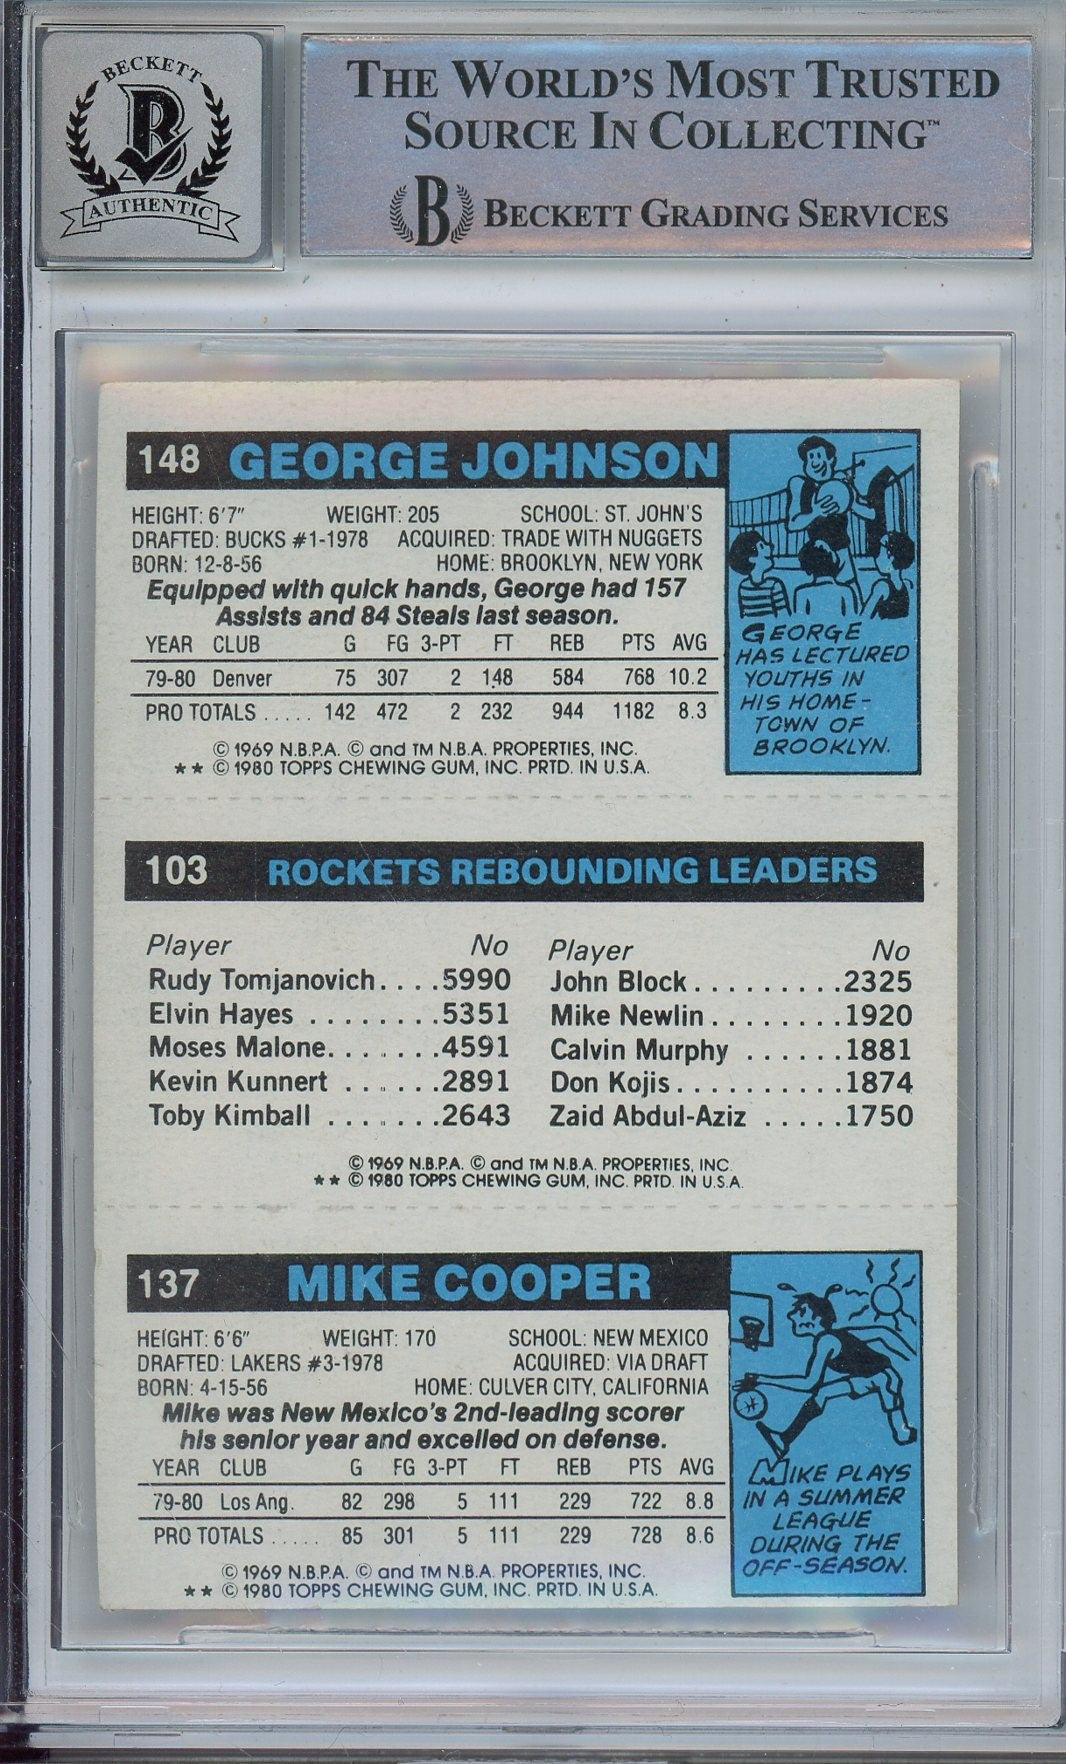 1980 TOPPS MIKE MICAHEL COOPER BAS RC ROOKIE AUTO CARD (9055)